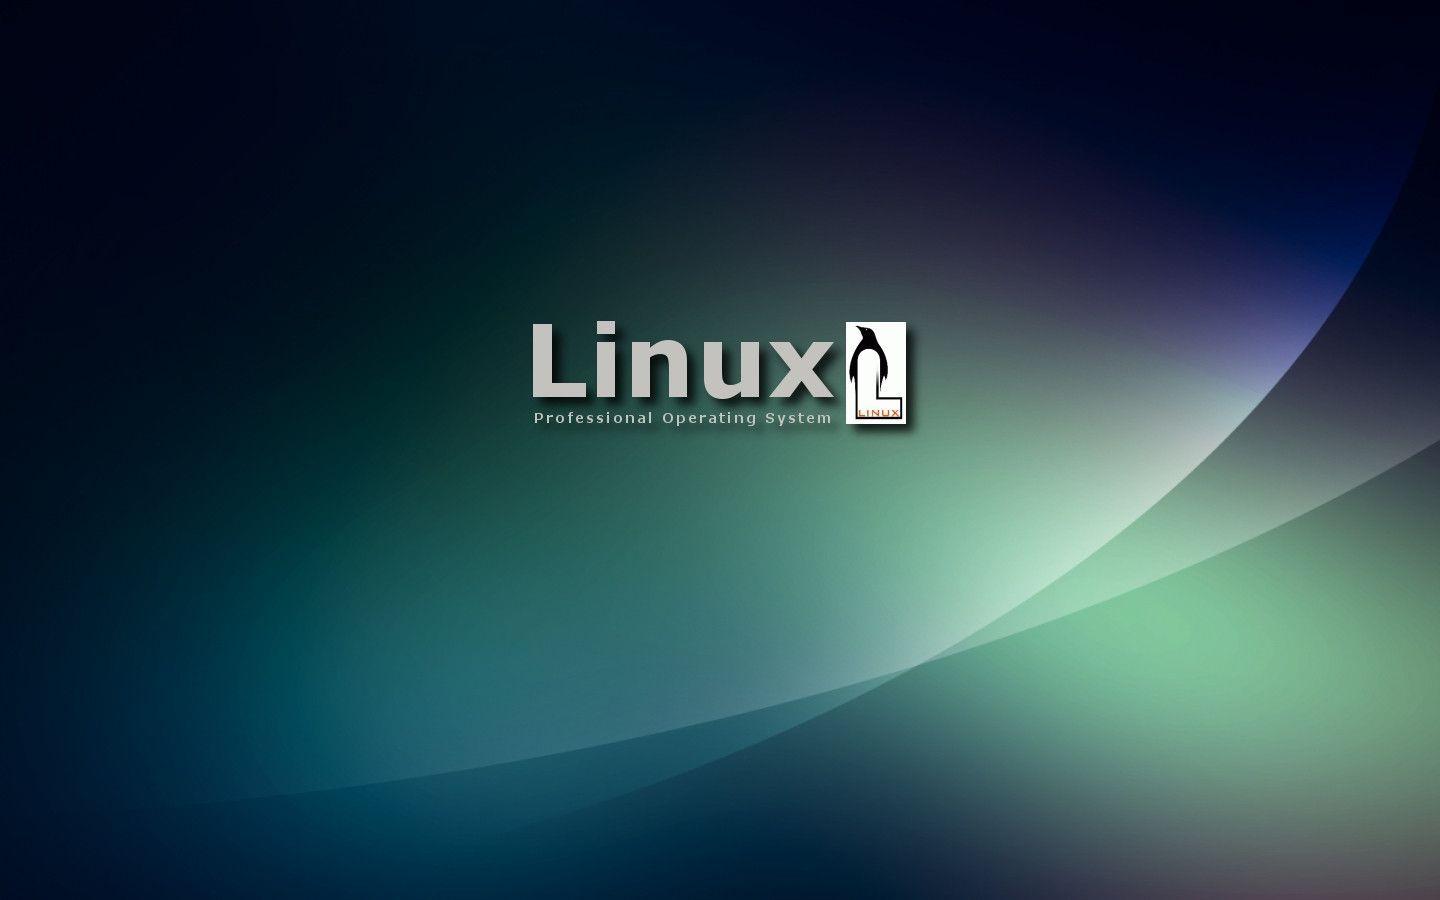 WallpapersWide.com : Linux Ultra HD Wallpapers for UHD, Widescreen,  UltraWide & Multi Display Desktop, Tablet & Smartphone | Page 1